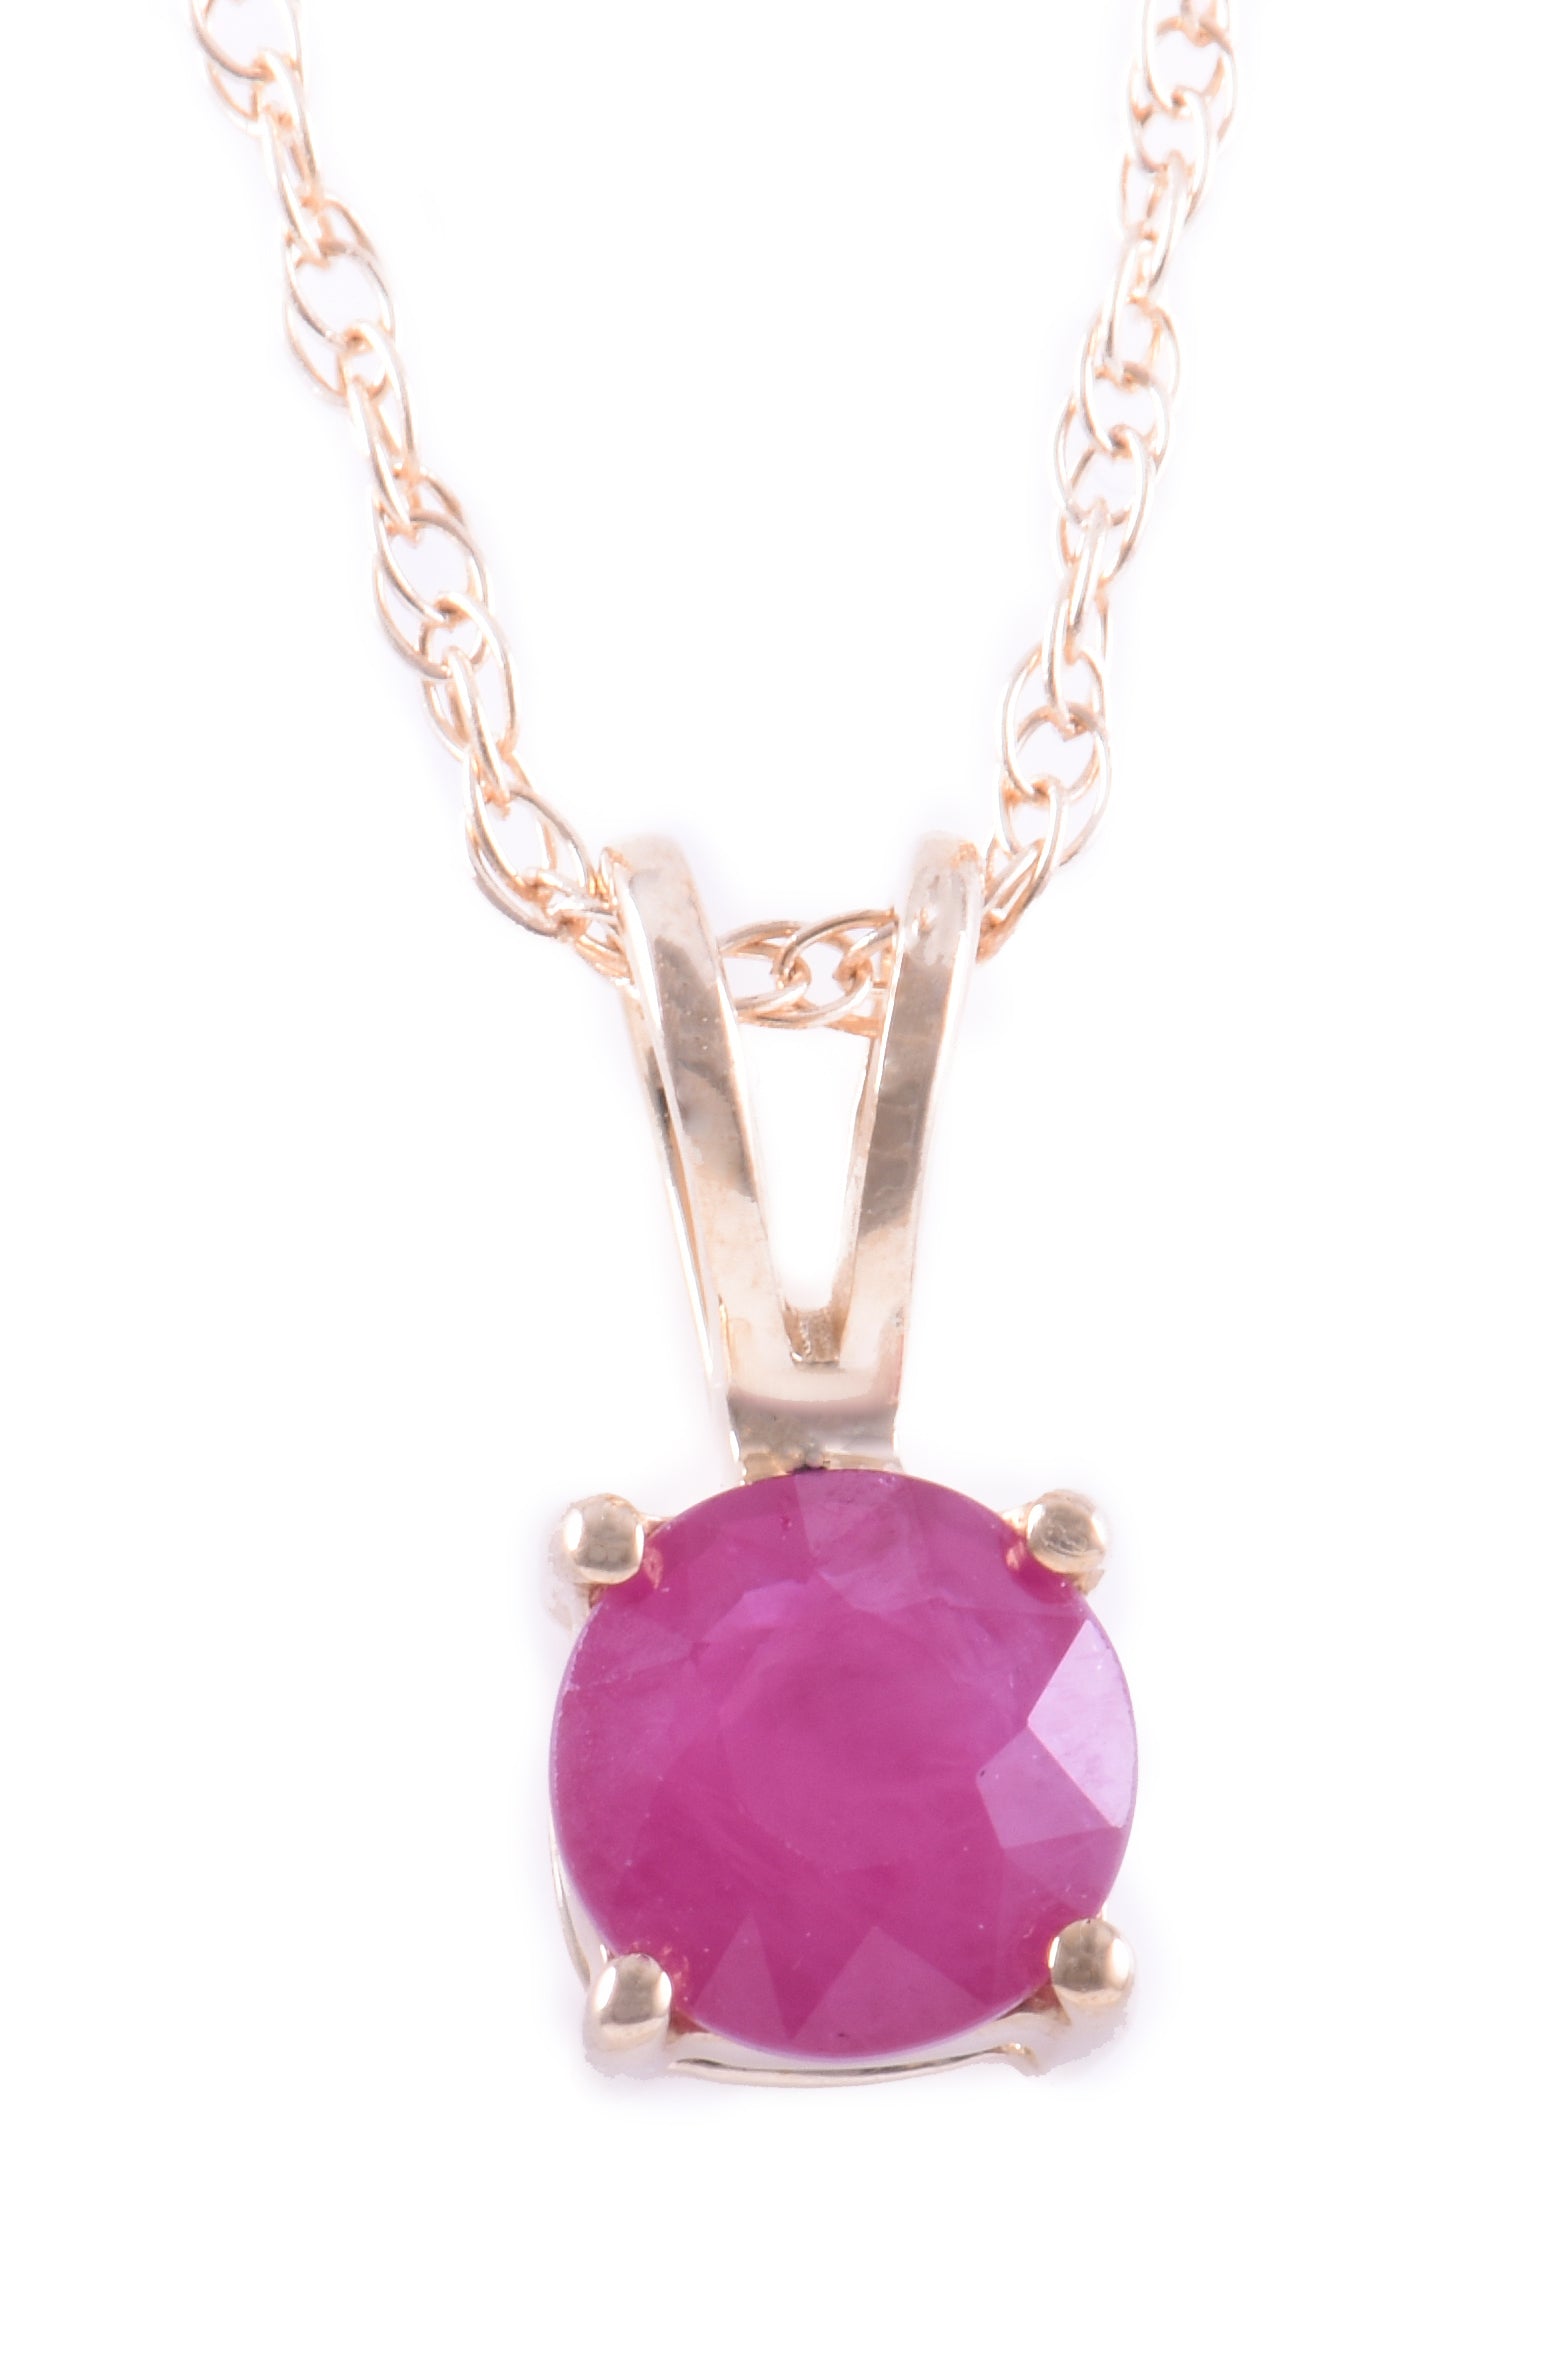 Classic Ruby Necklace - Colored Stone Necklace